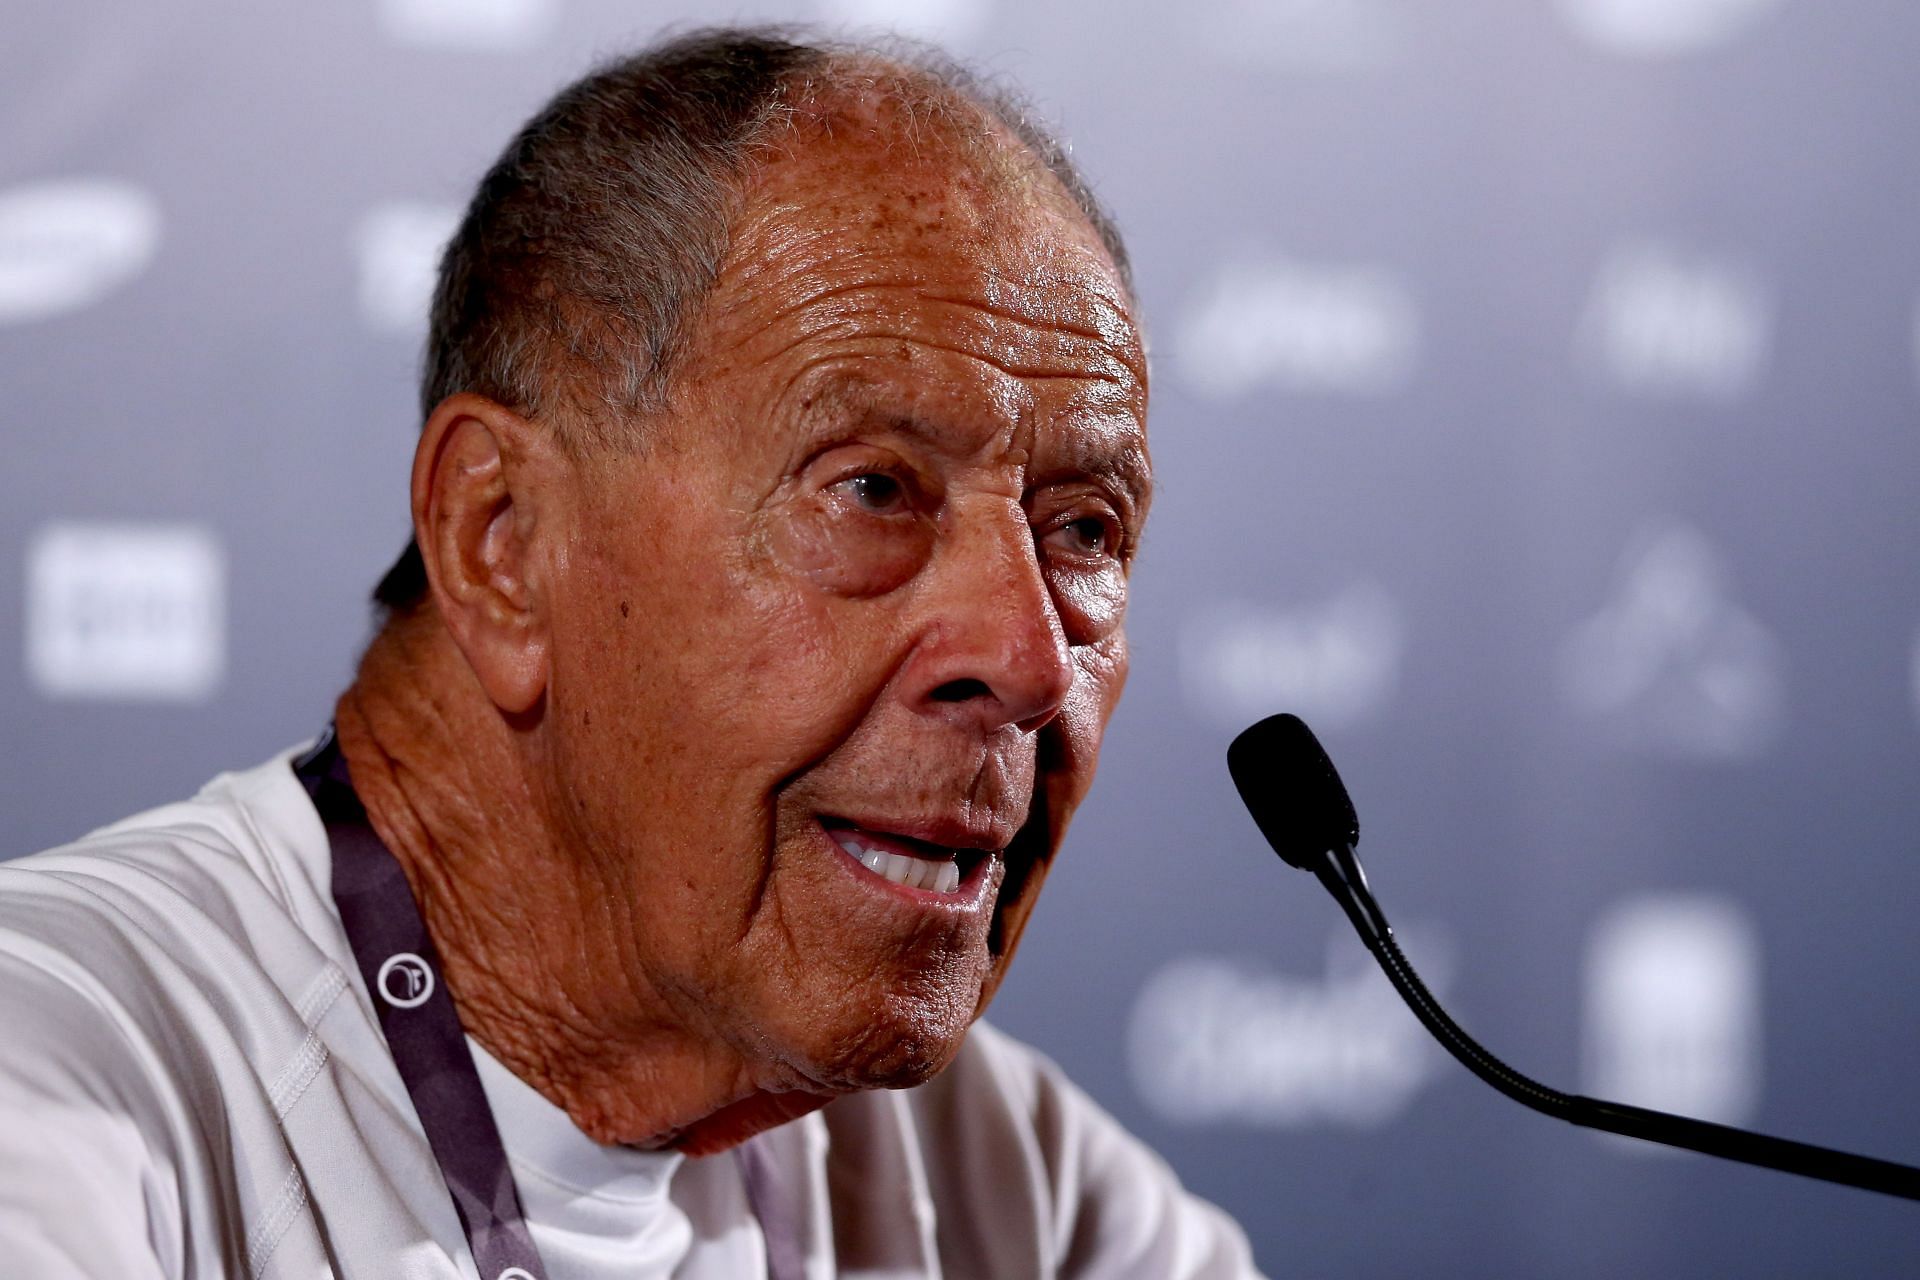 Bollettieri pictured during a press conference at the 2015 Rio Open.